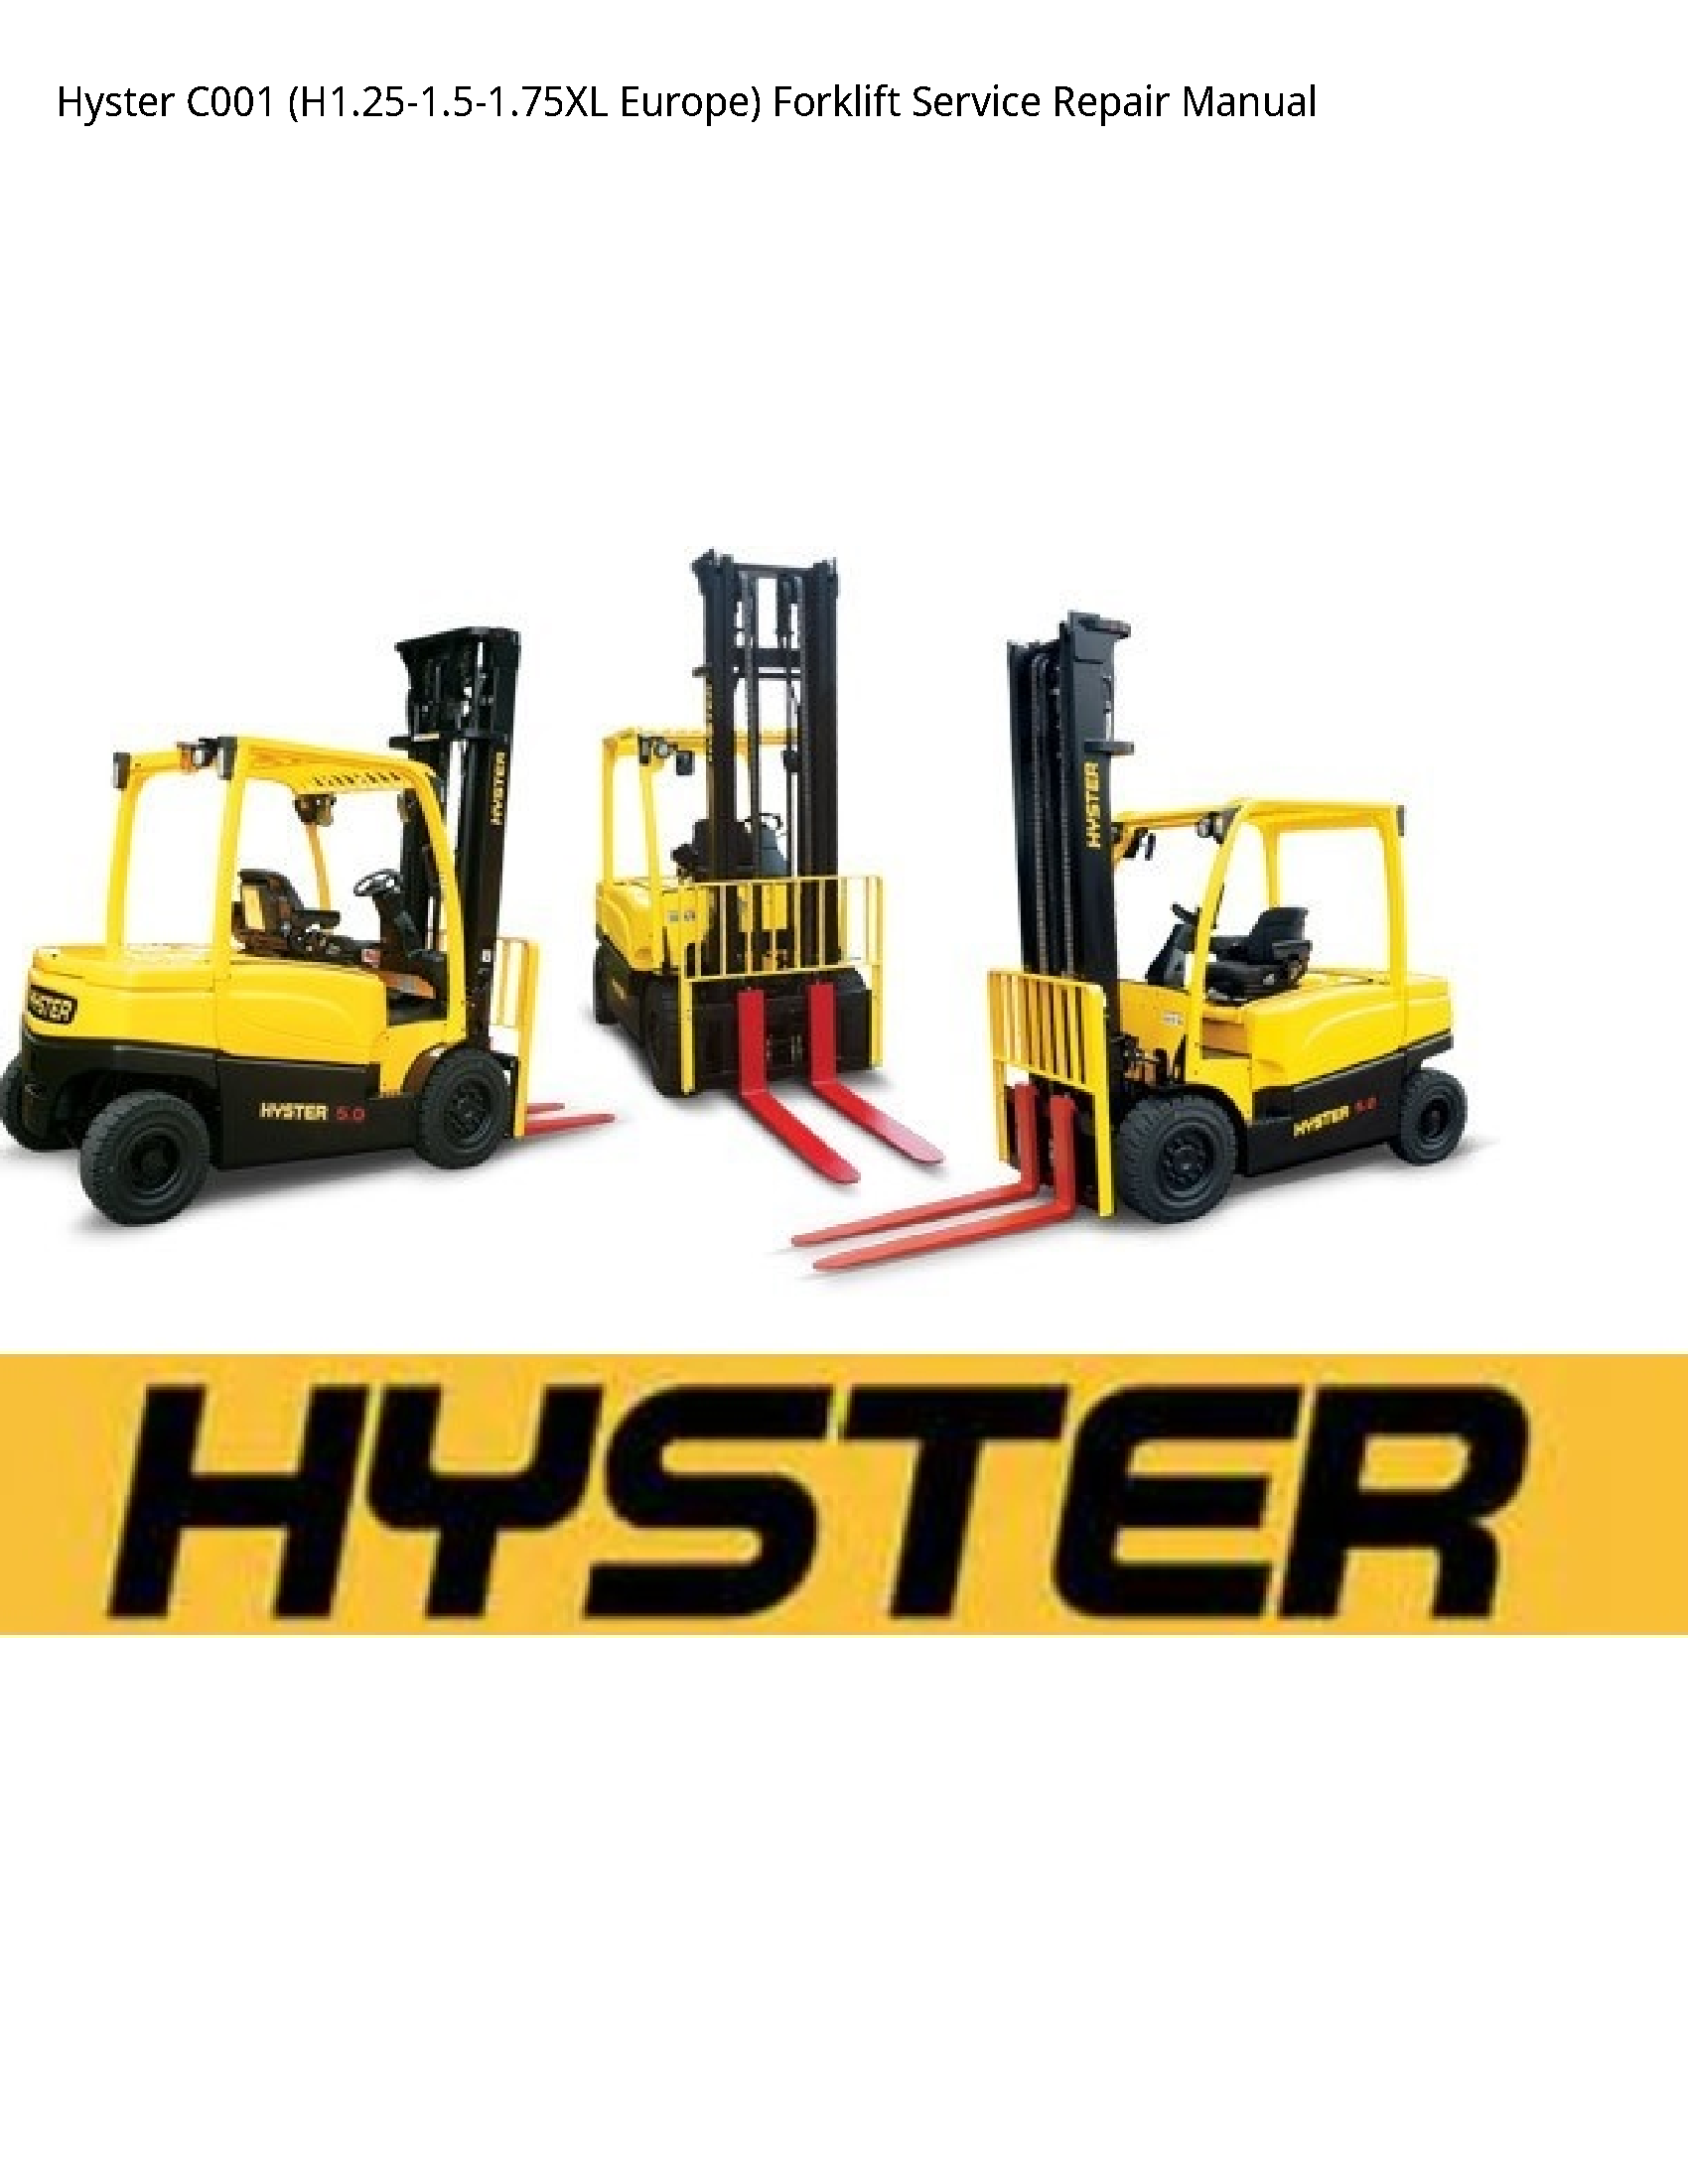 Hyster C001 Europe) Forklift manual